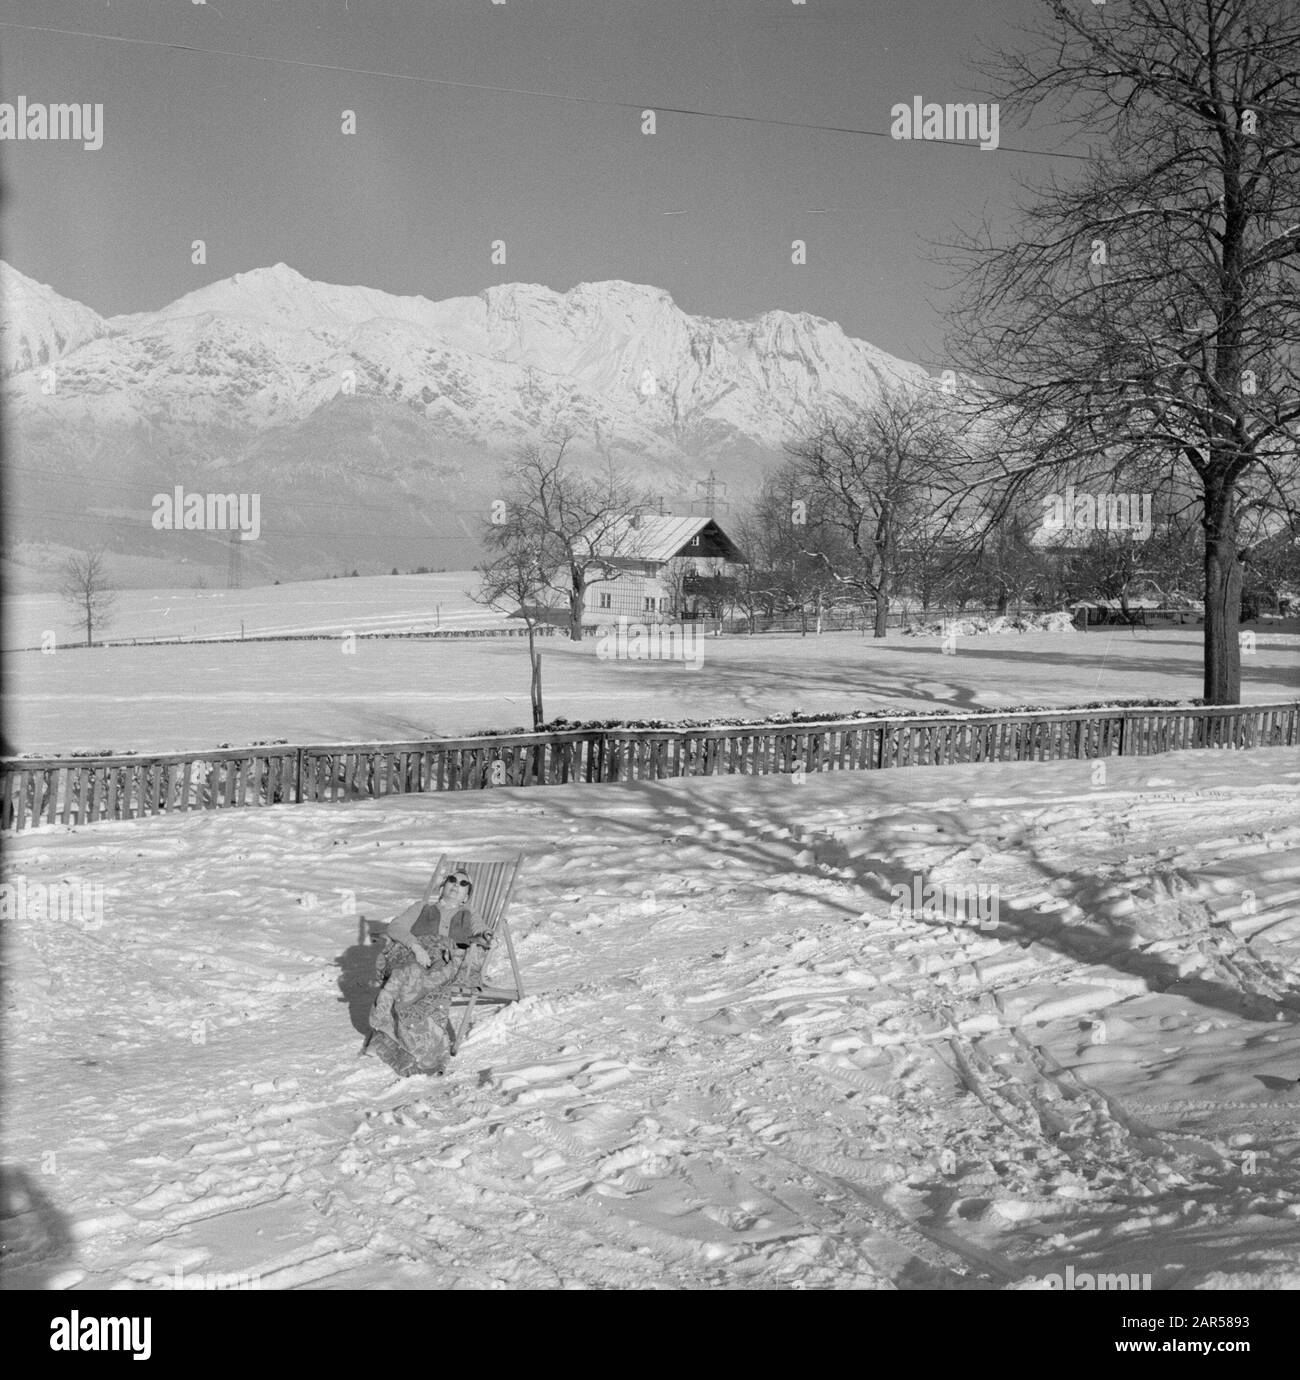 Winter in Tyrol  Hilde Eschen lies sunbathing in the snow with in the background the Karwendel Mountains Date: January 1960 Location: Austria, Sistrans, Tyrol Keywords: mountains, villages, landscapes, snow, holiday, winter Personal name: Echen, Hilde Stock Photo